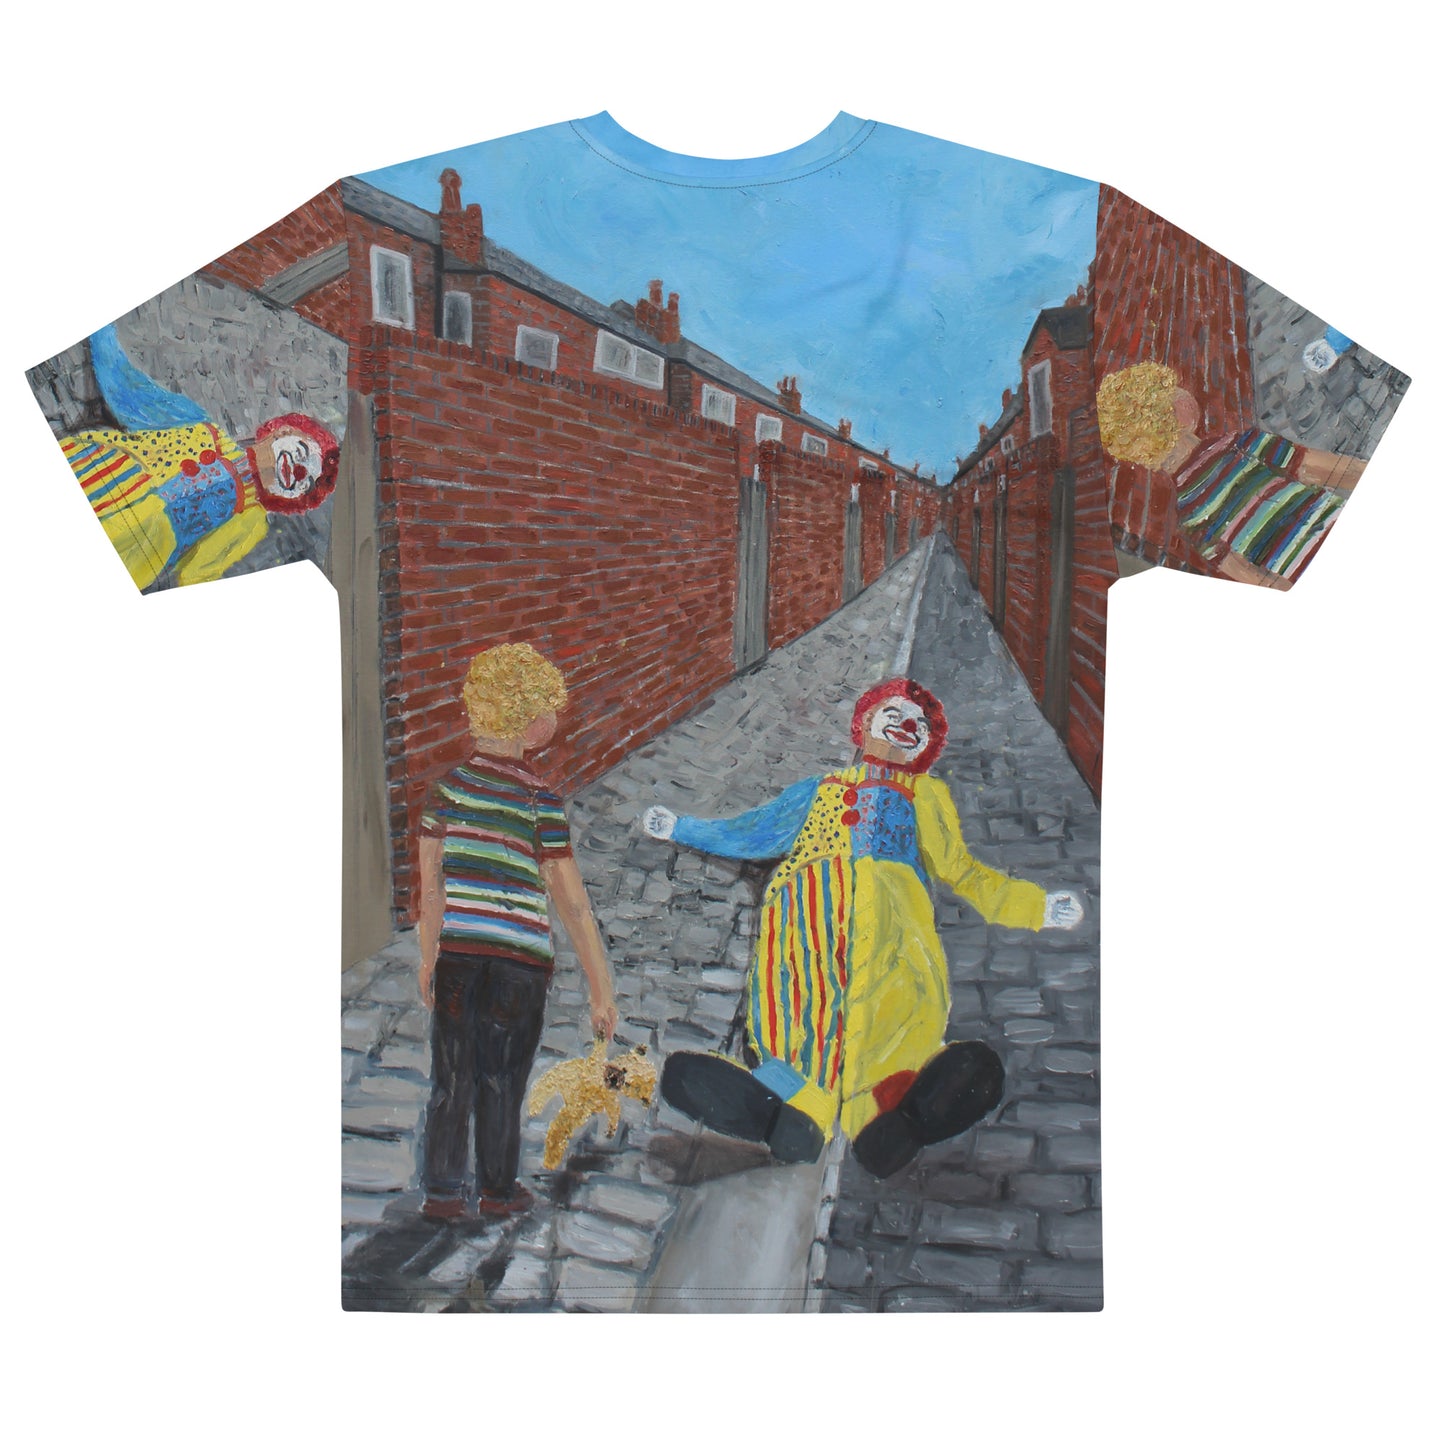 There's a Clown in the Entry - unisex t-shirt